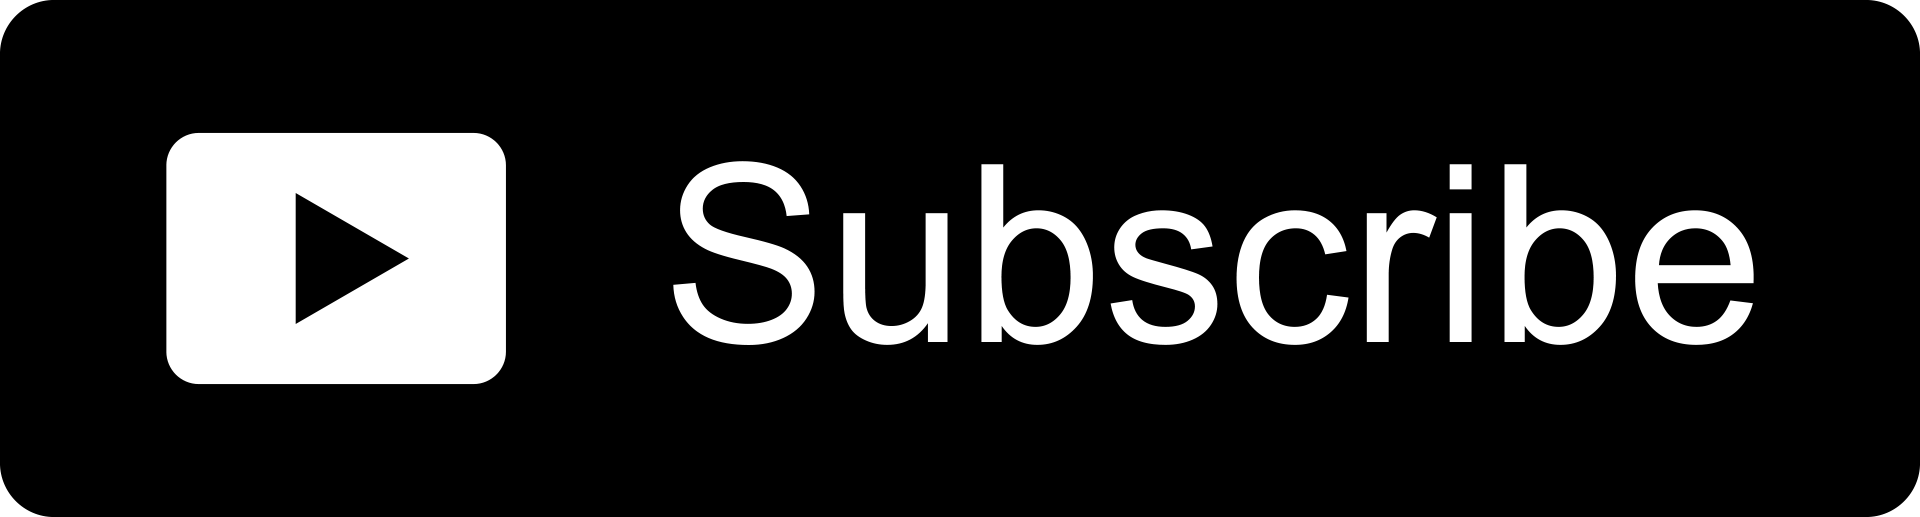 Free-Black-Subscribe-Button-By-AlfredoCreates